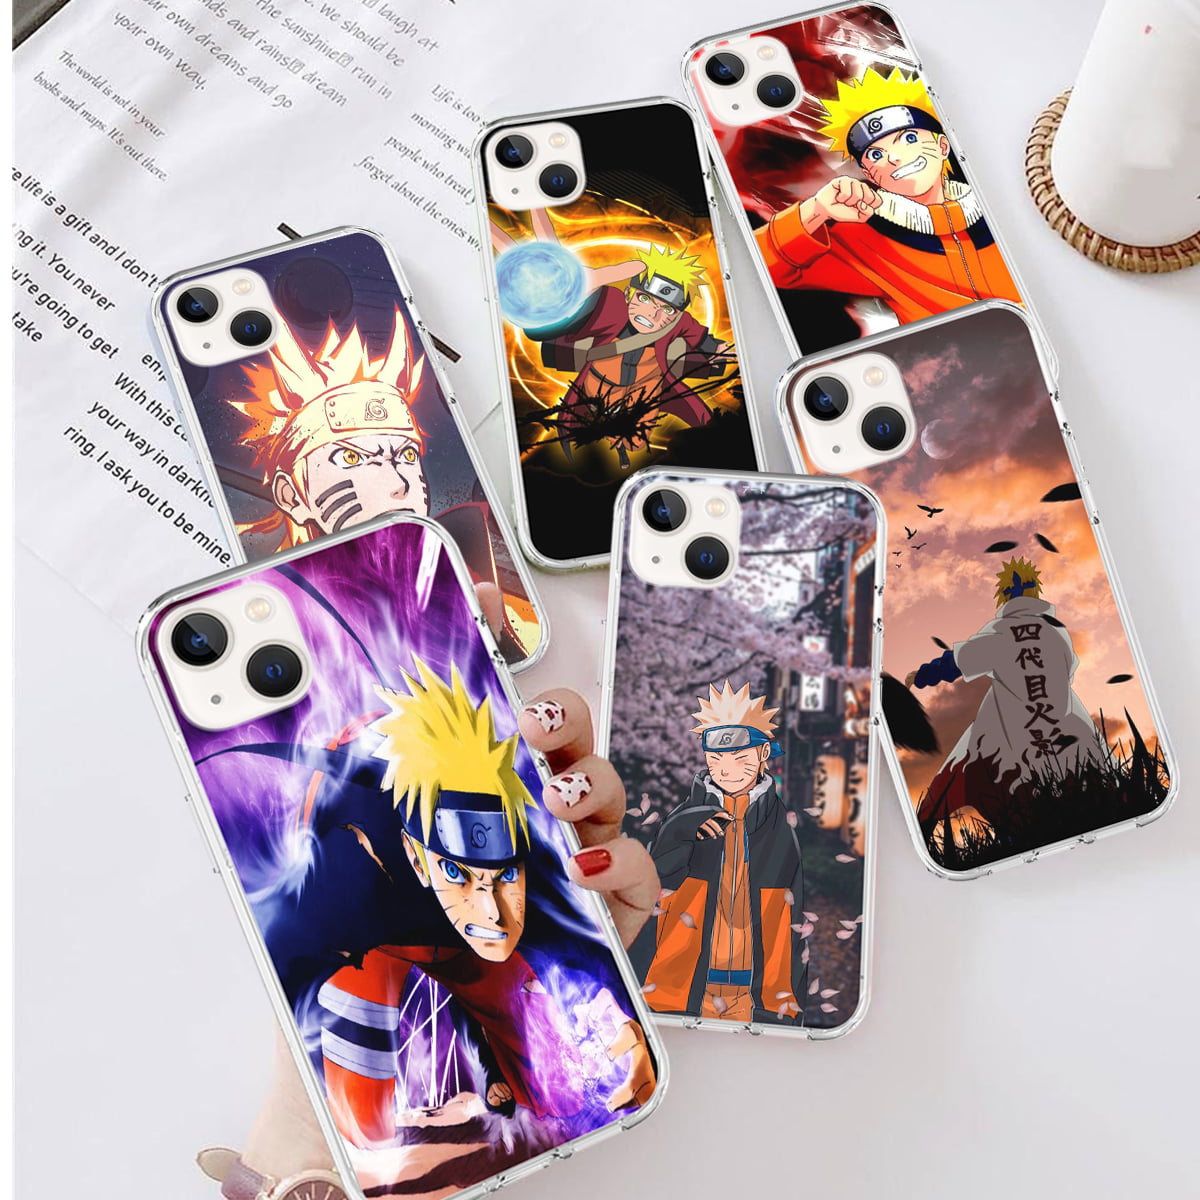 iPhone Case iPhone Designer Silicone 12/13 Pro Max Case AirPods 1st/2nd/Pro iPhone Anime Cartoon Case